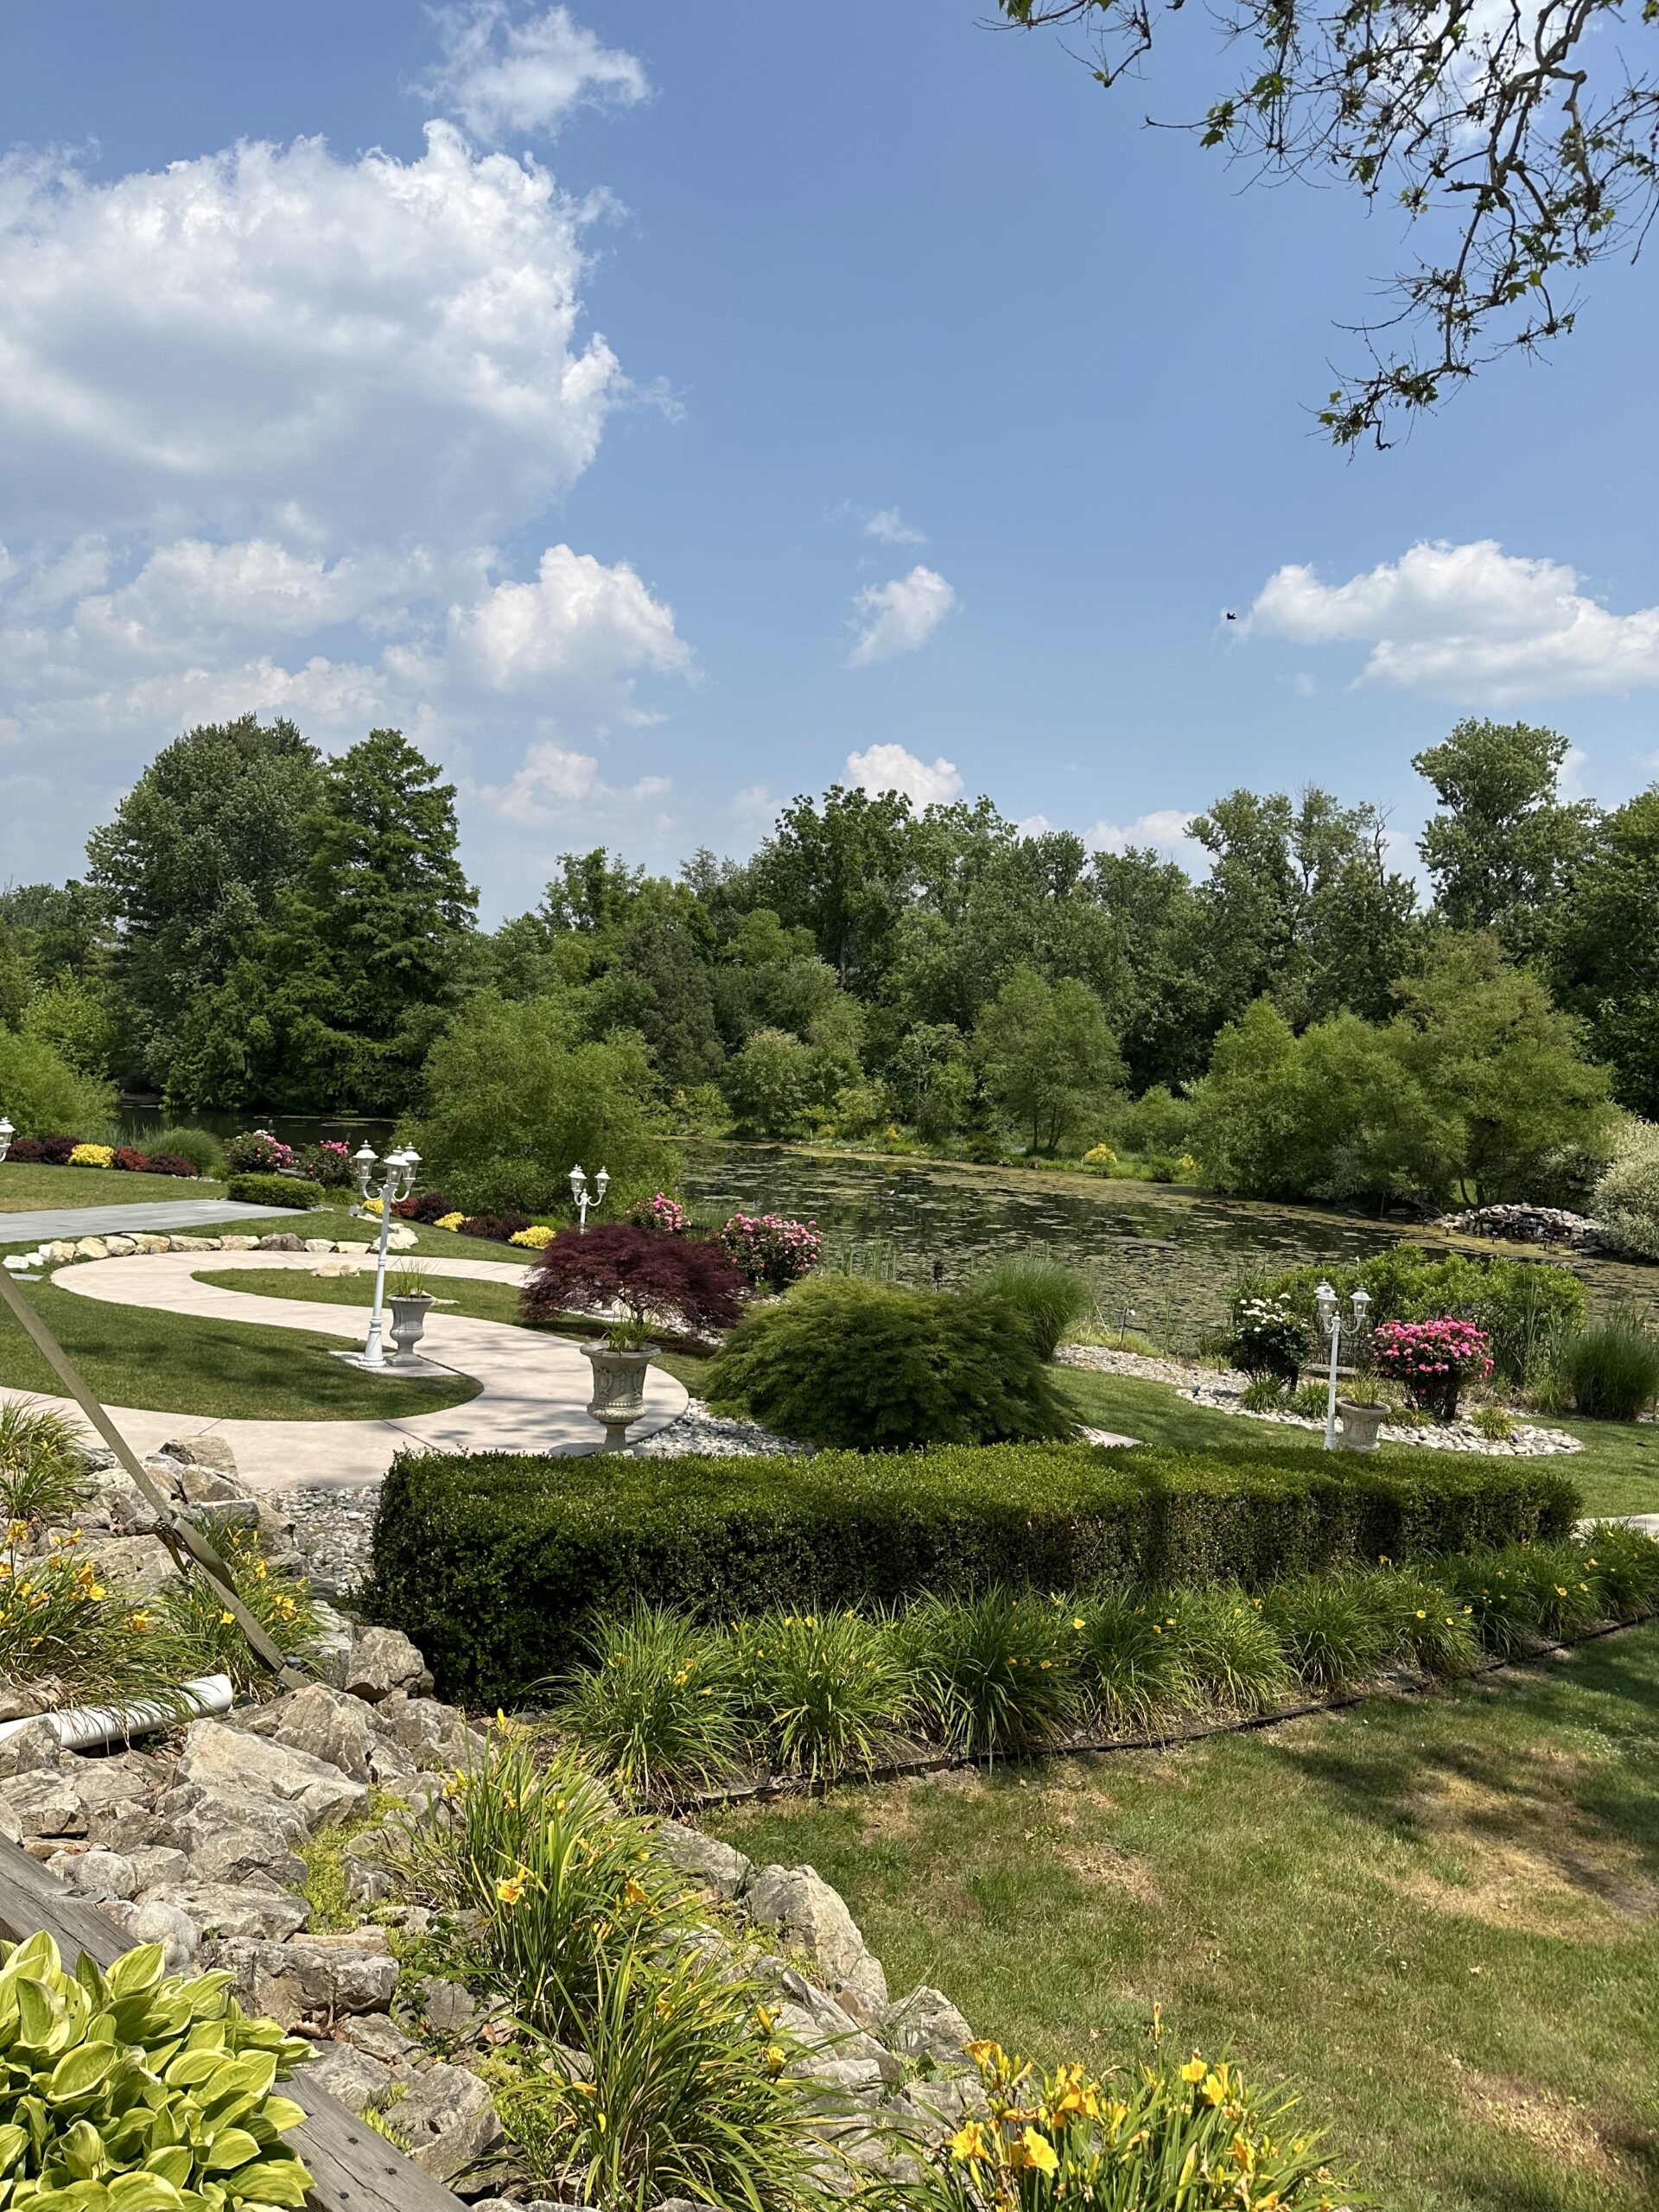 The manor house at prophecy creek in Ambler Montgomery County Pennsylvania offers, winding pathways and ponds, manicured and mature, landscaping perfect for photos